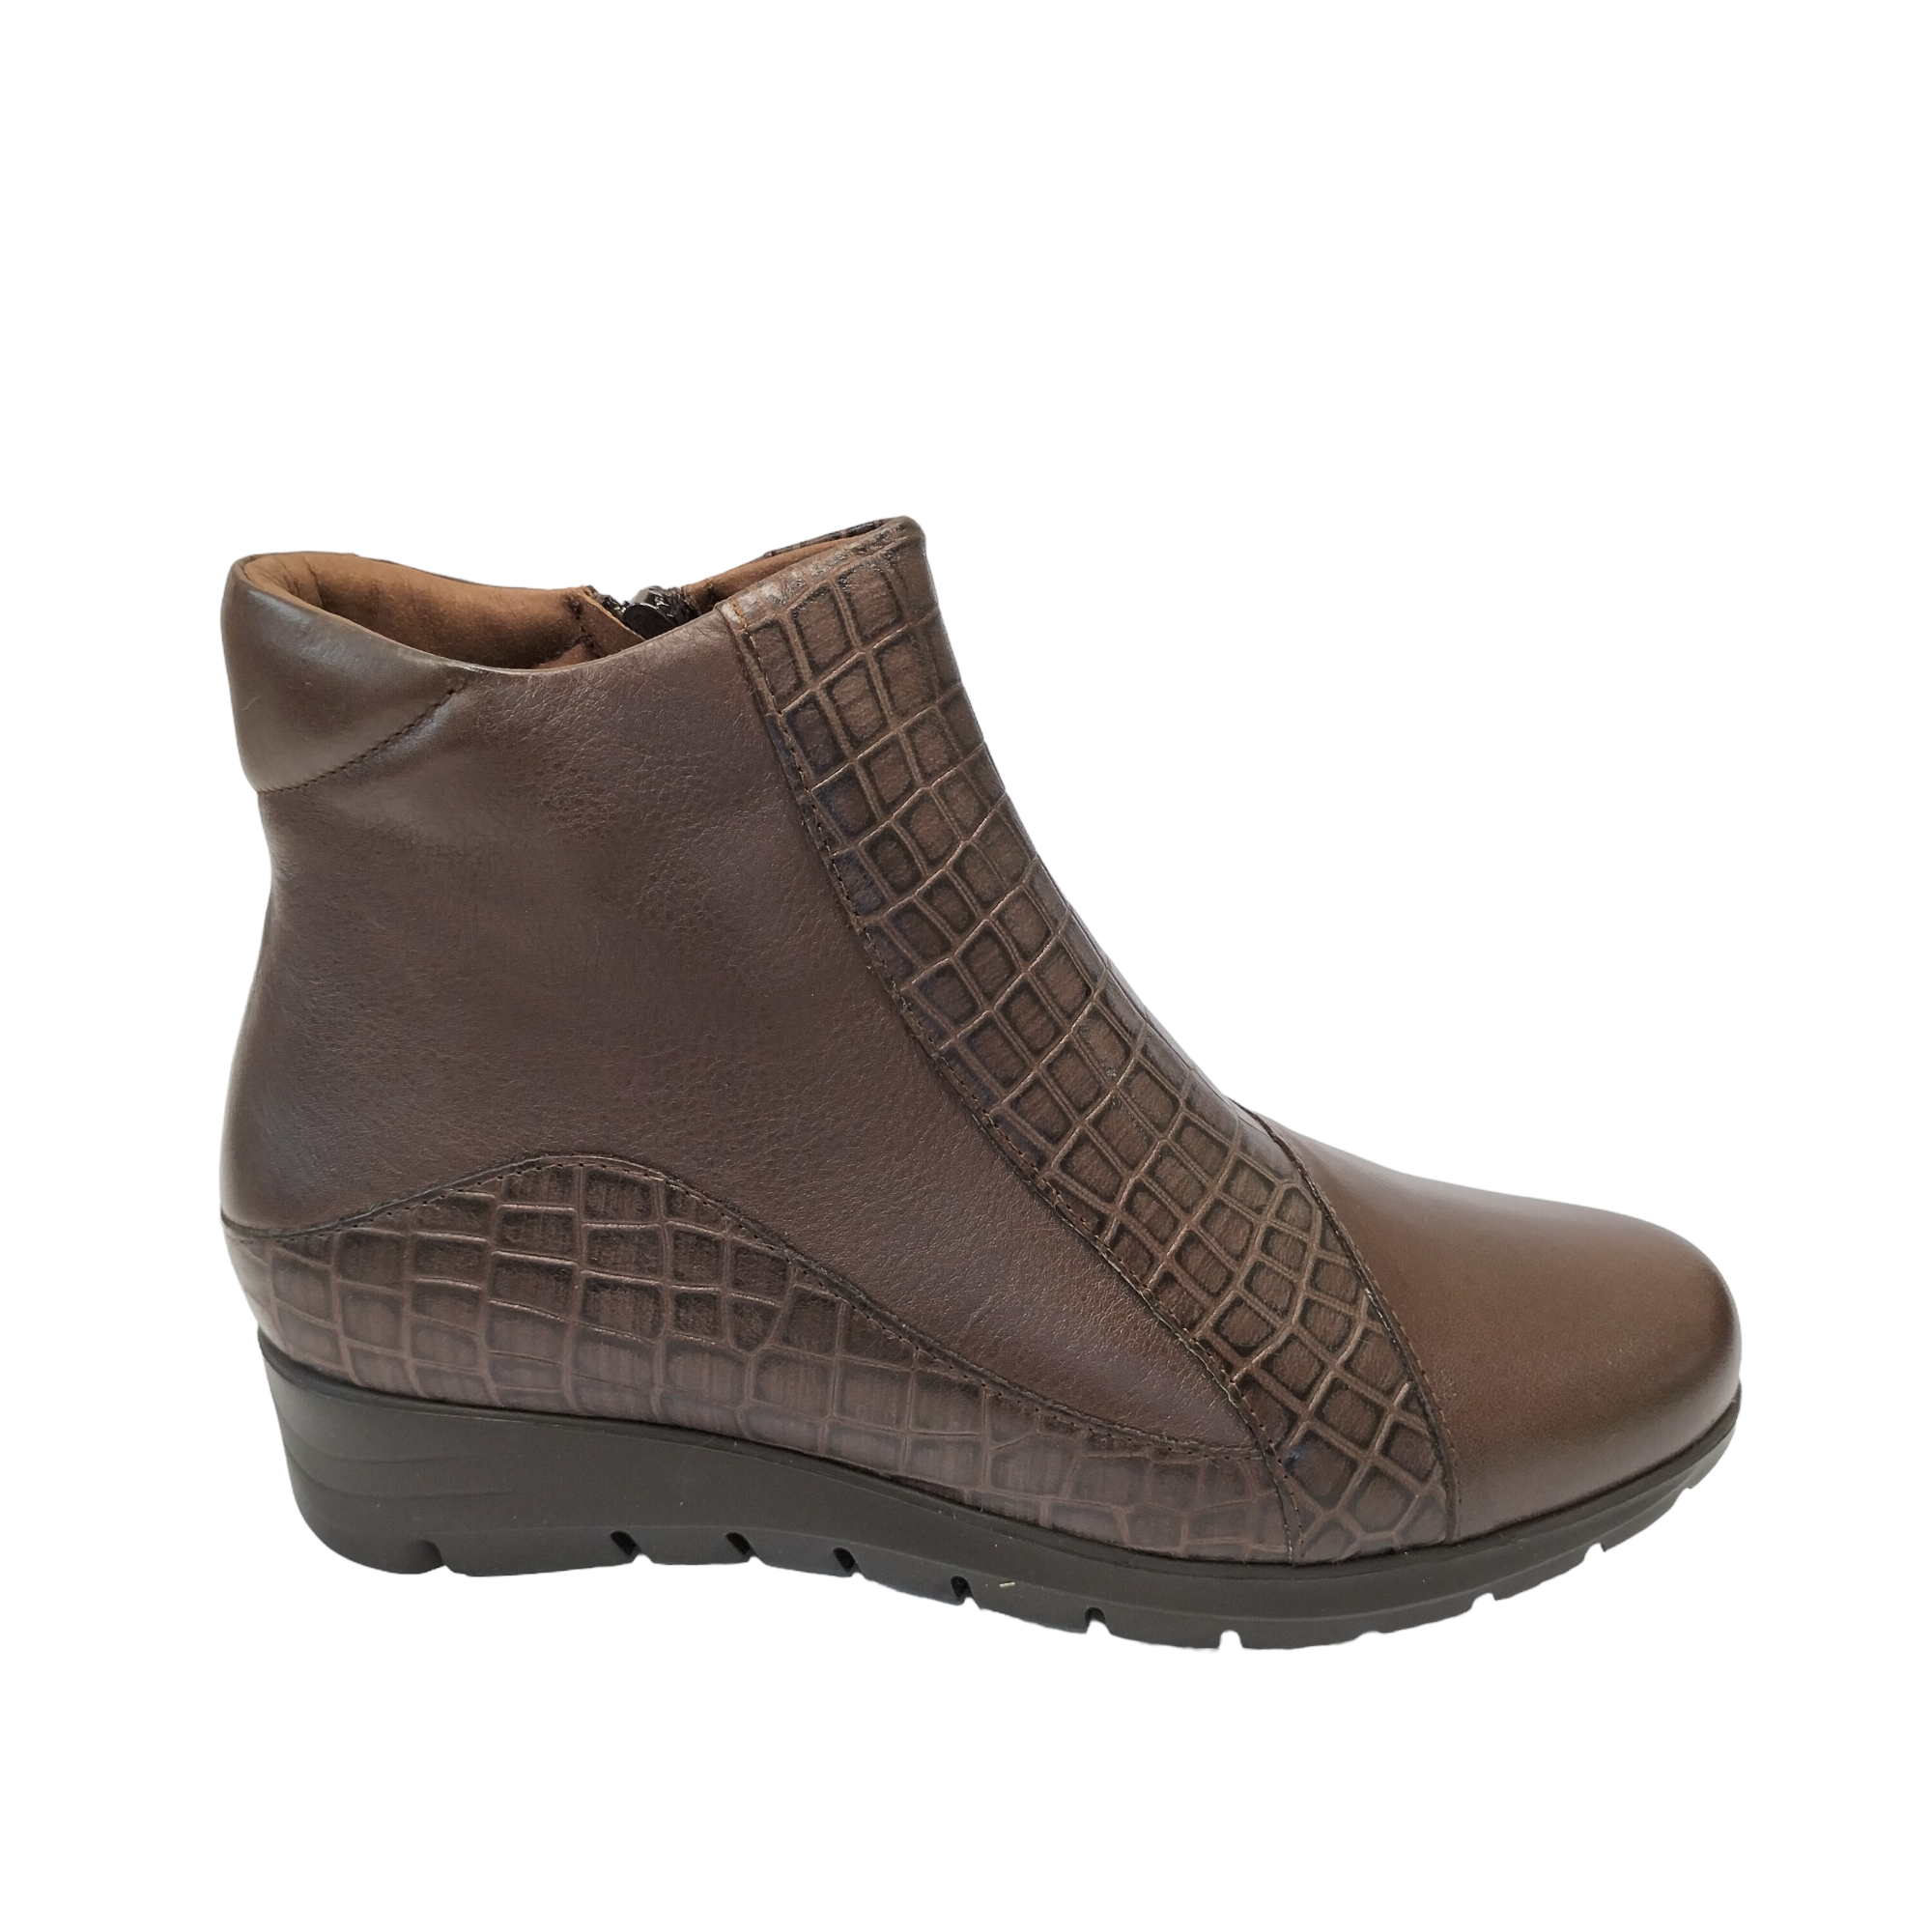 PI 2501 - shoe&amp;me - Pitillos - Boot - Boots, Winter, Womens